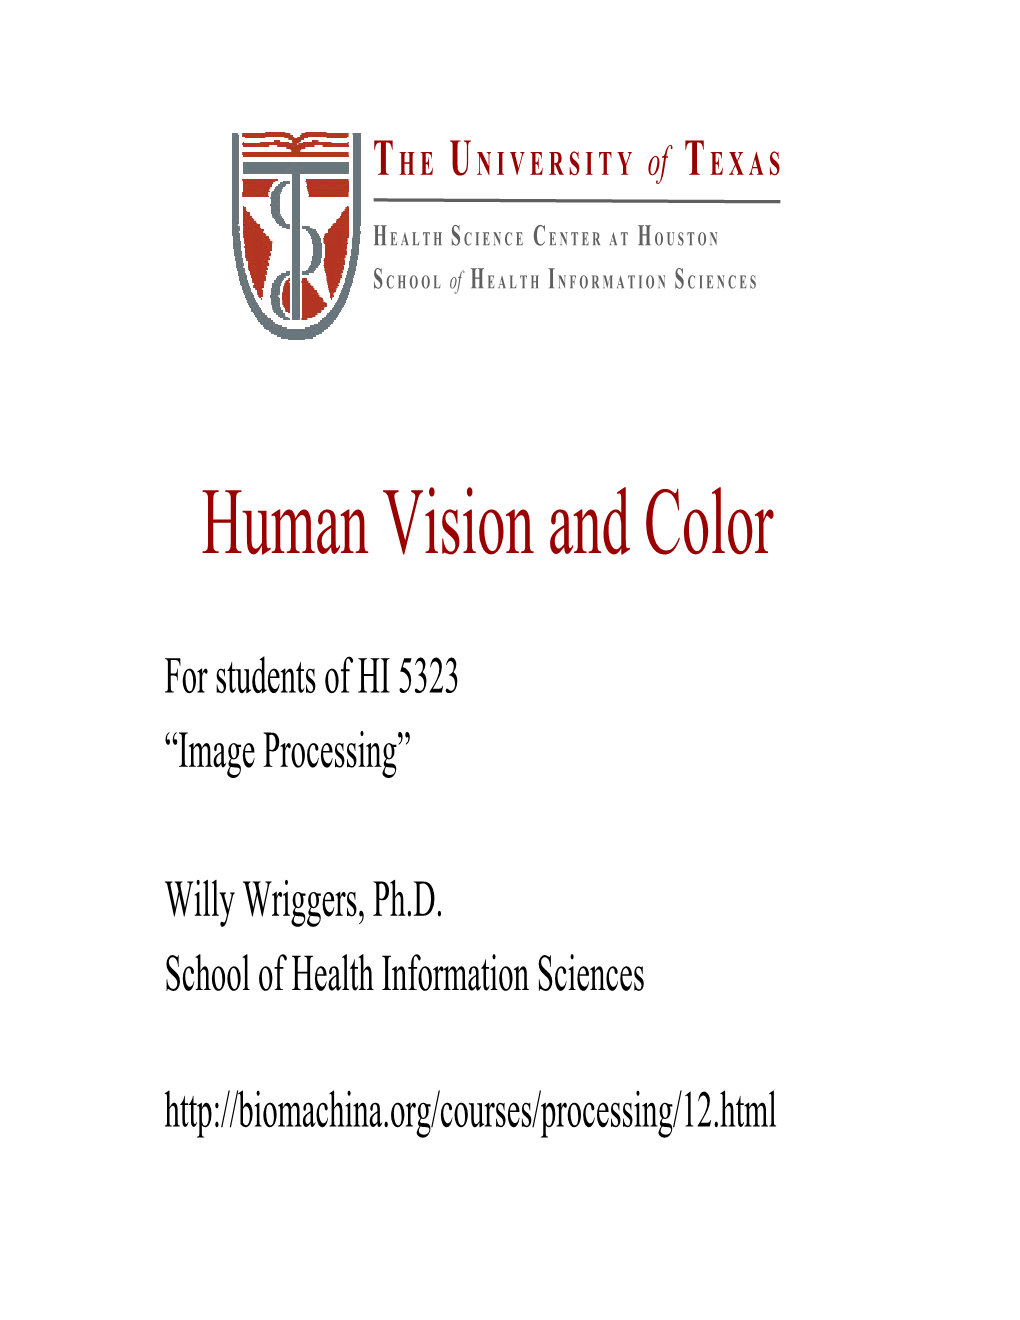 Human Vision and Color